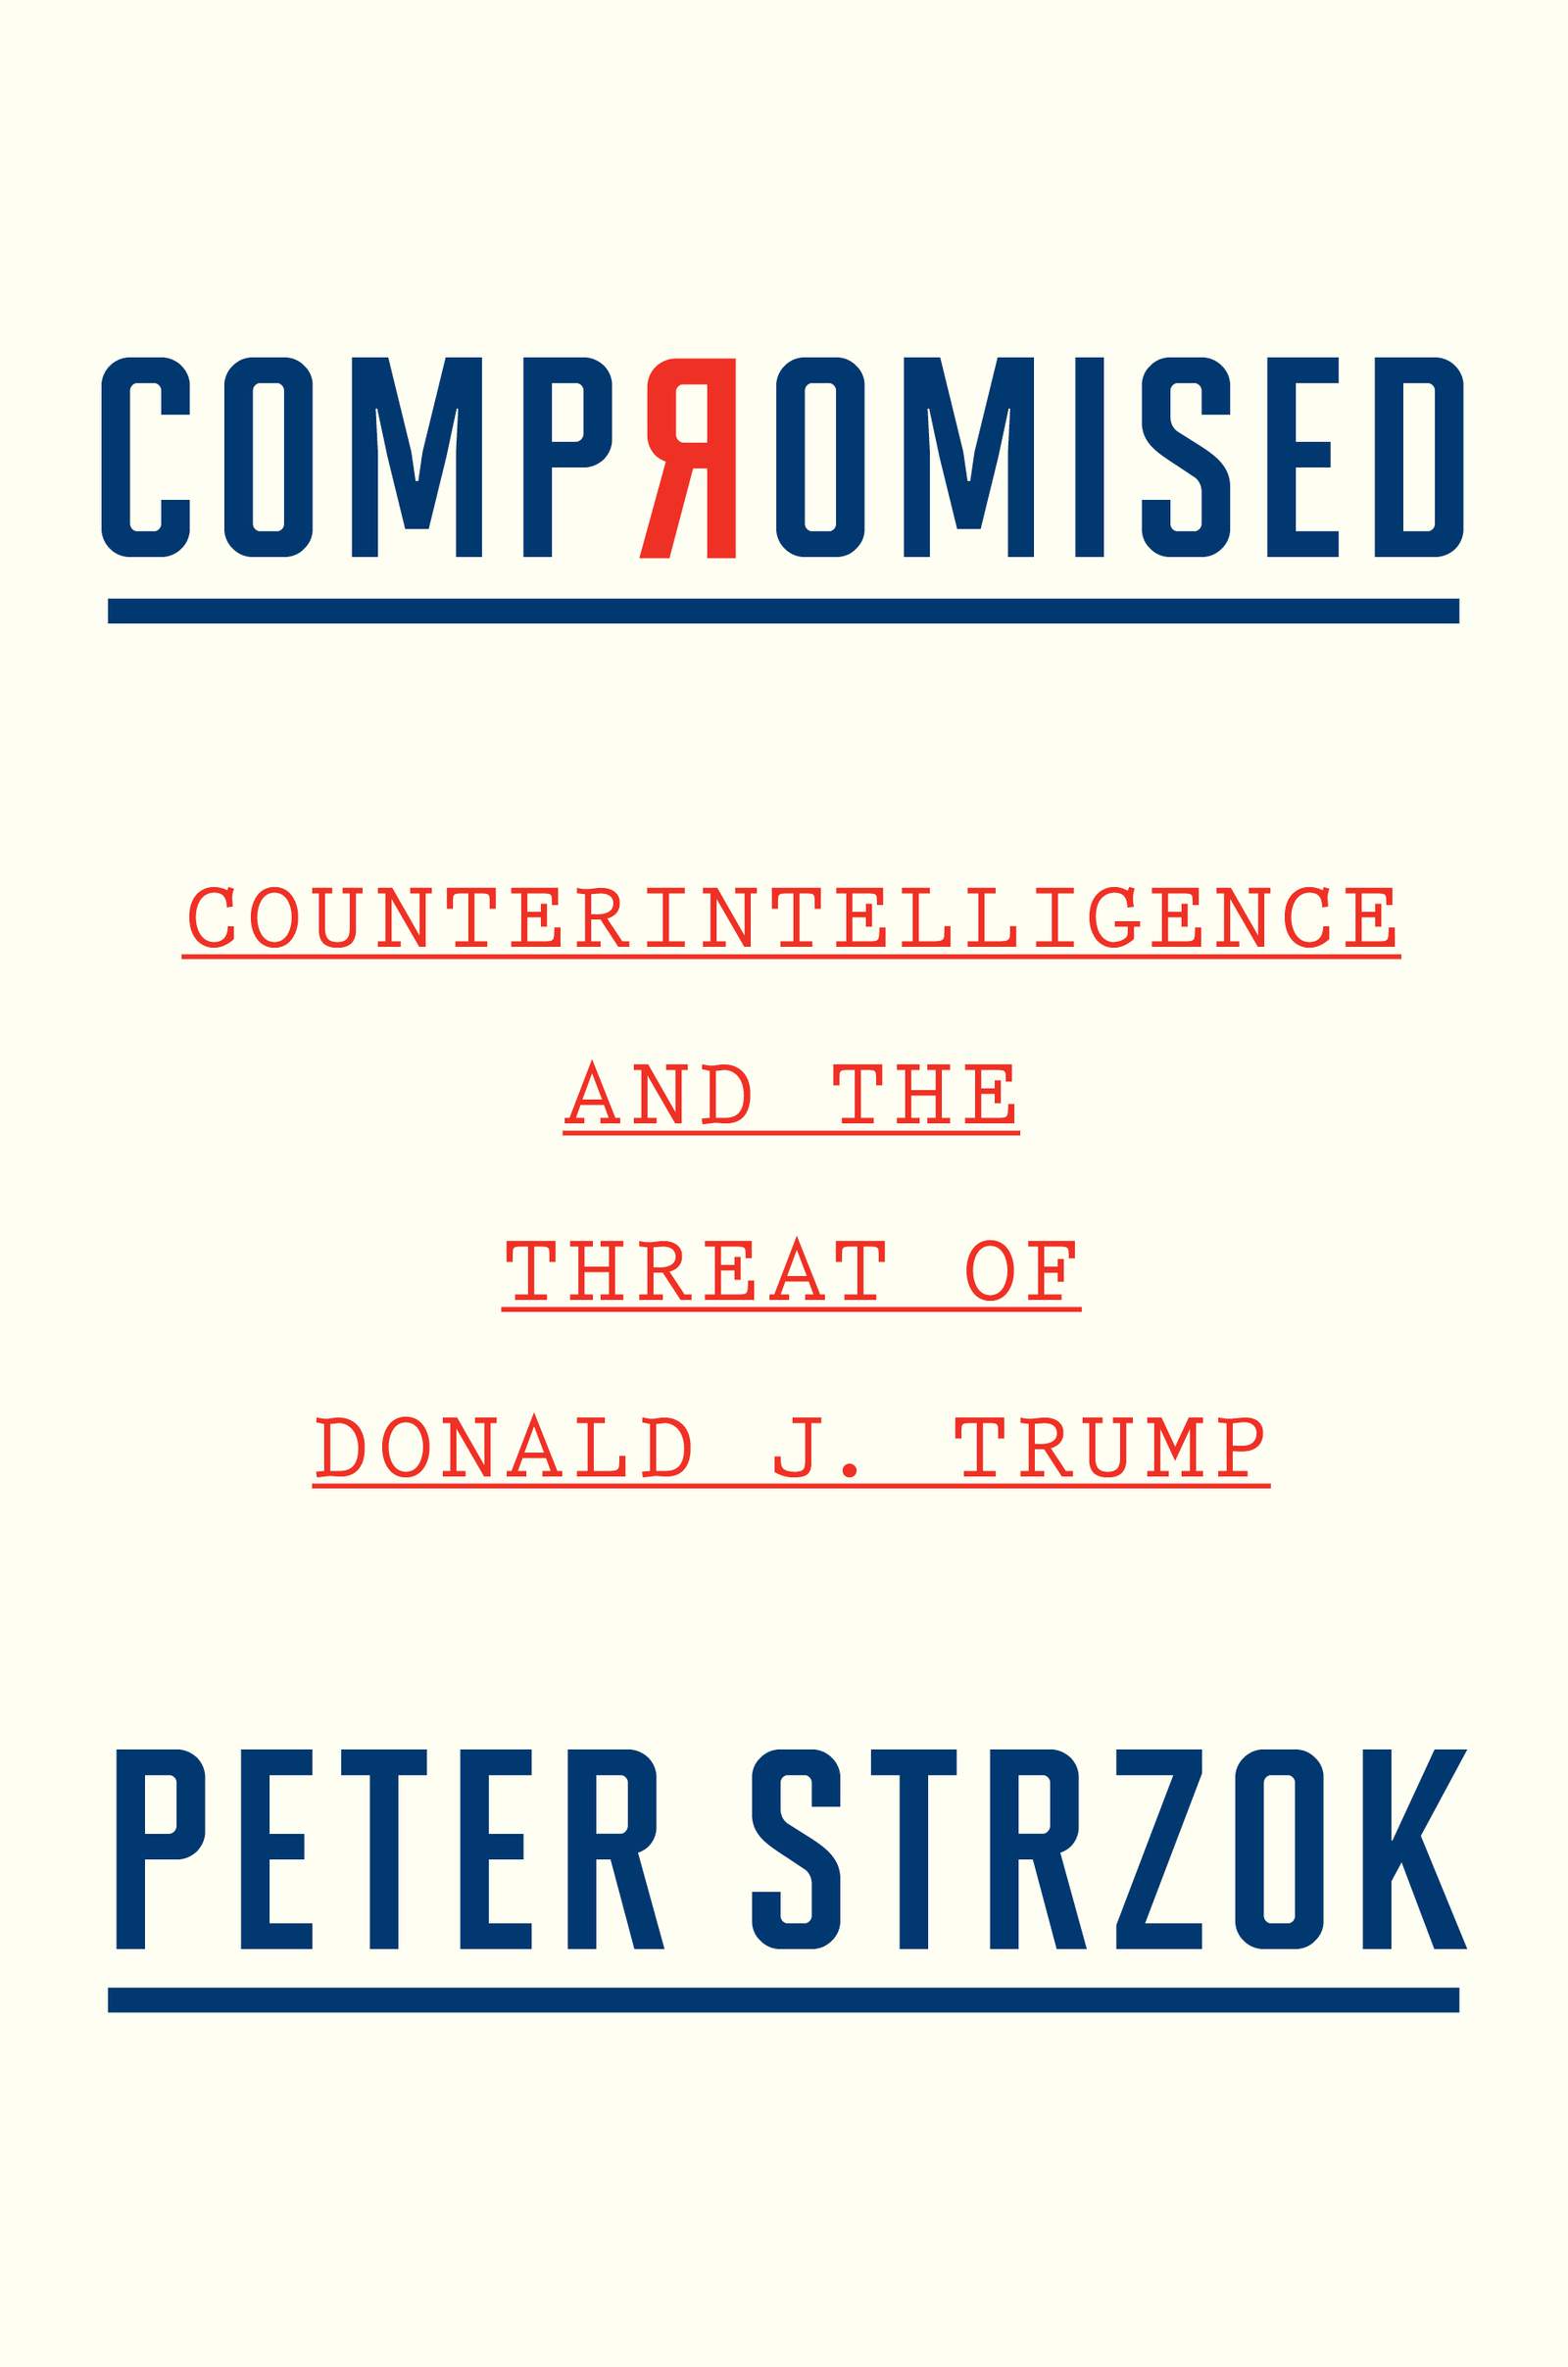 Ex-FBI agent Strzok due out with book about Trump, Russia